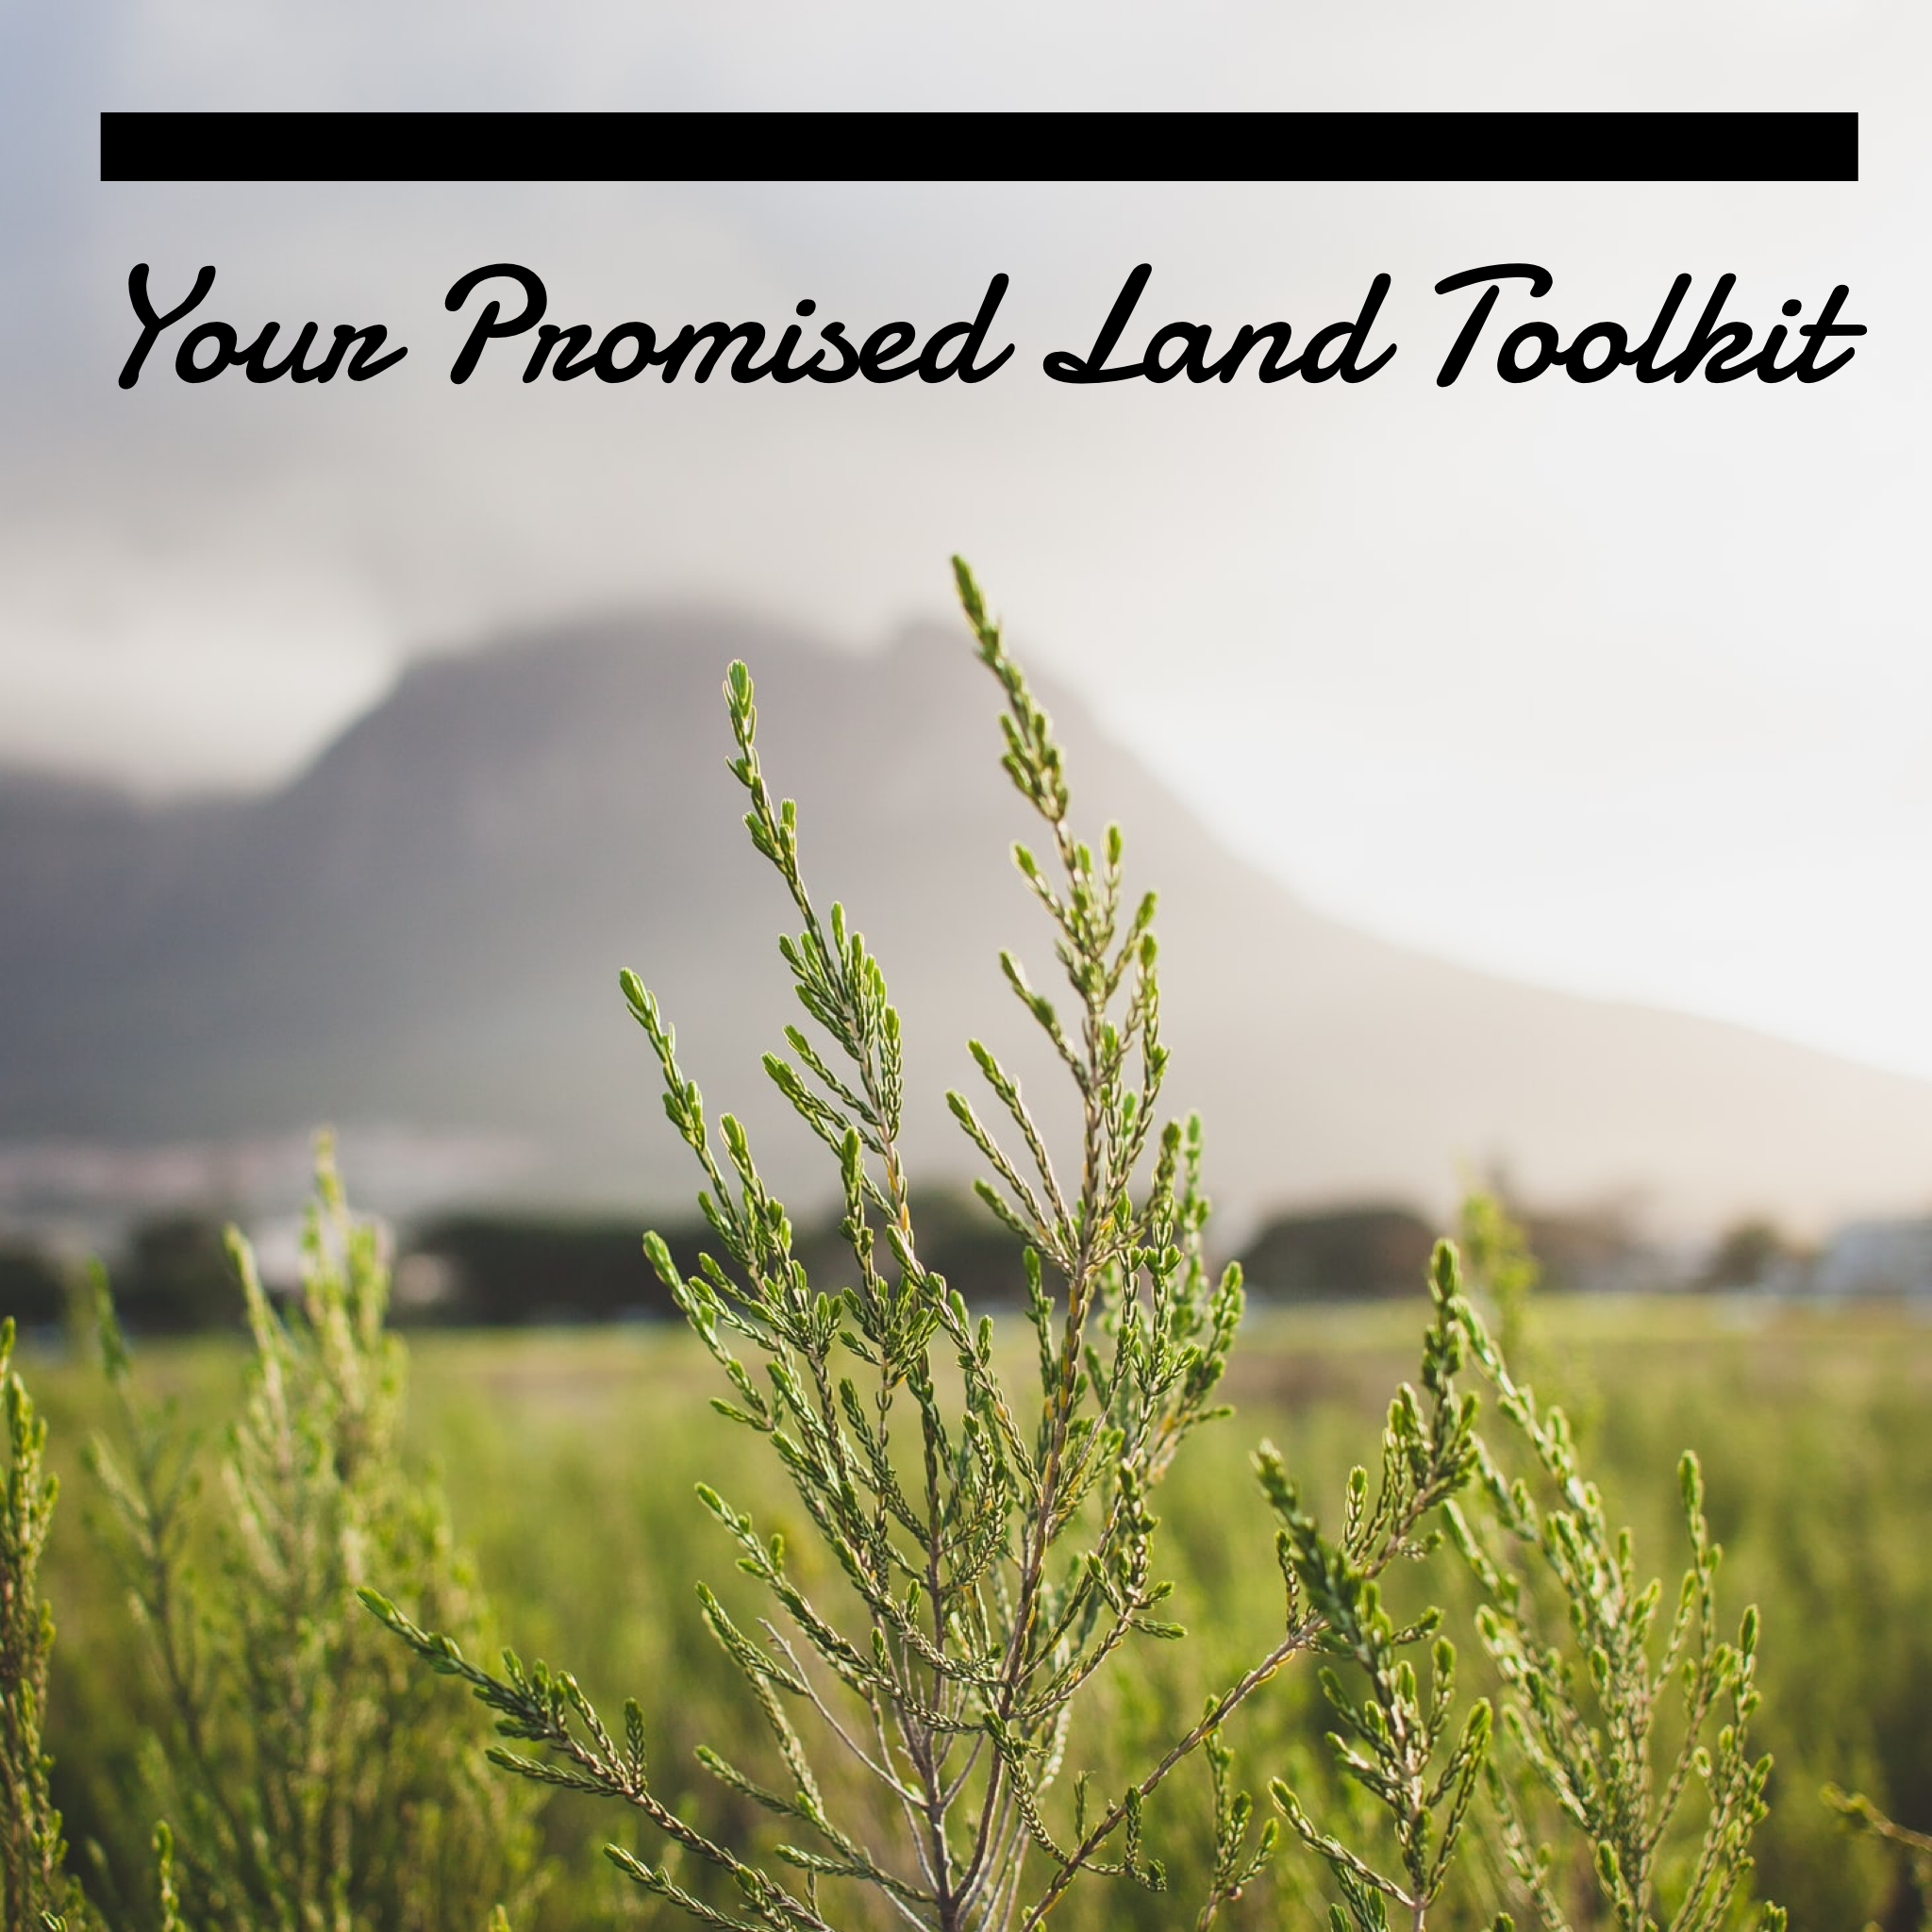 Your Promised Land Toolkit - 8/9/19